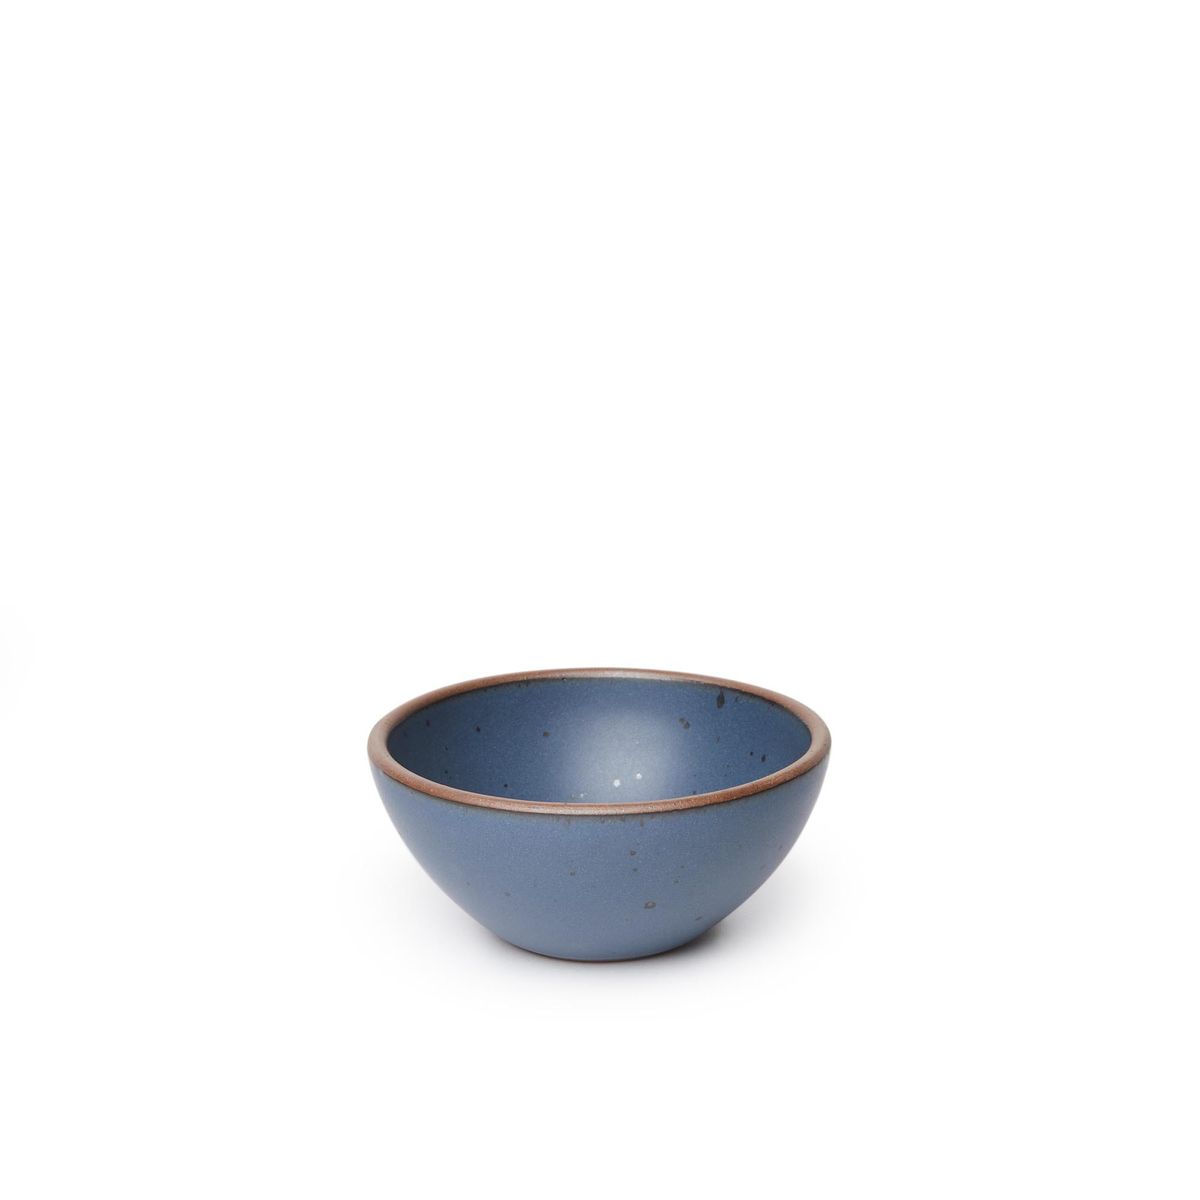 A small dessert sized rounded ceramic bowl in a toned-down navy color featuring iron speckles and an unglazed rim